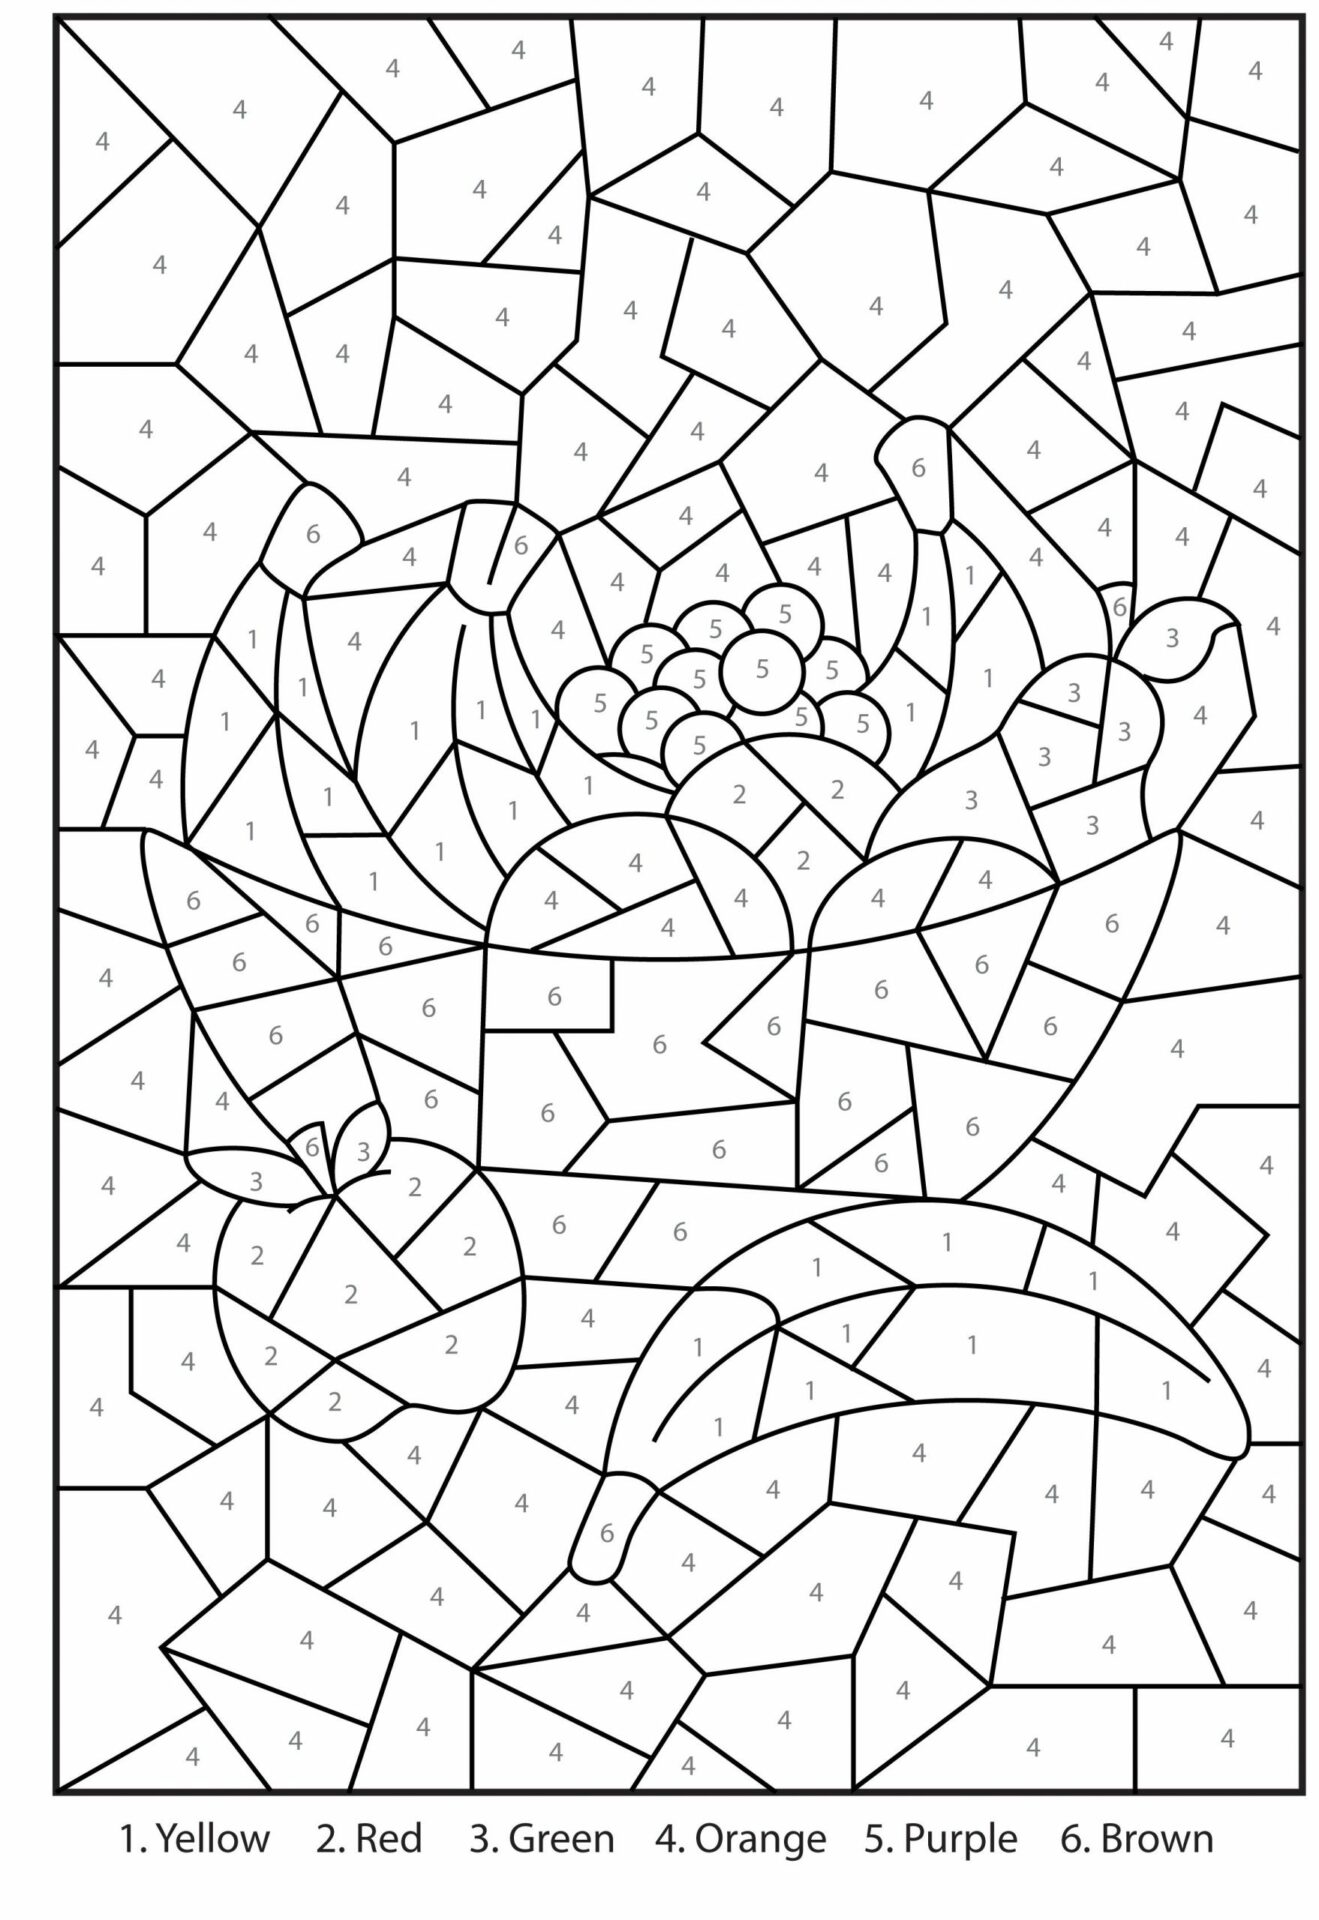 Fruits Basket For Coloring By Numbers Coloring Page Free Printable Coloring Pages For Kids